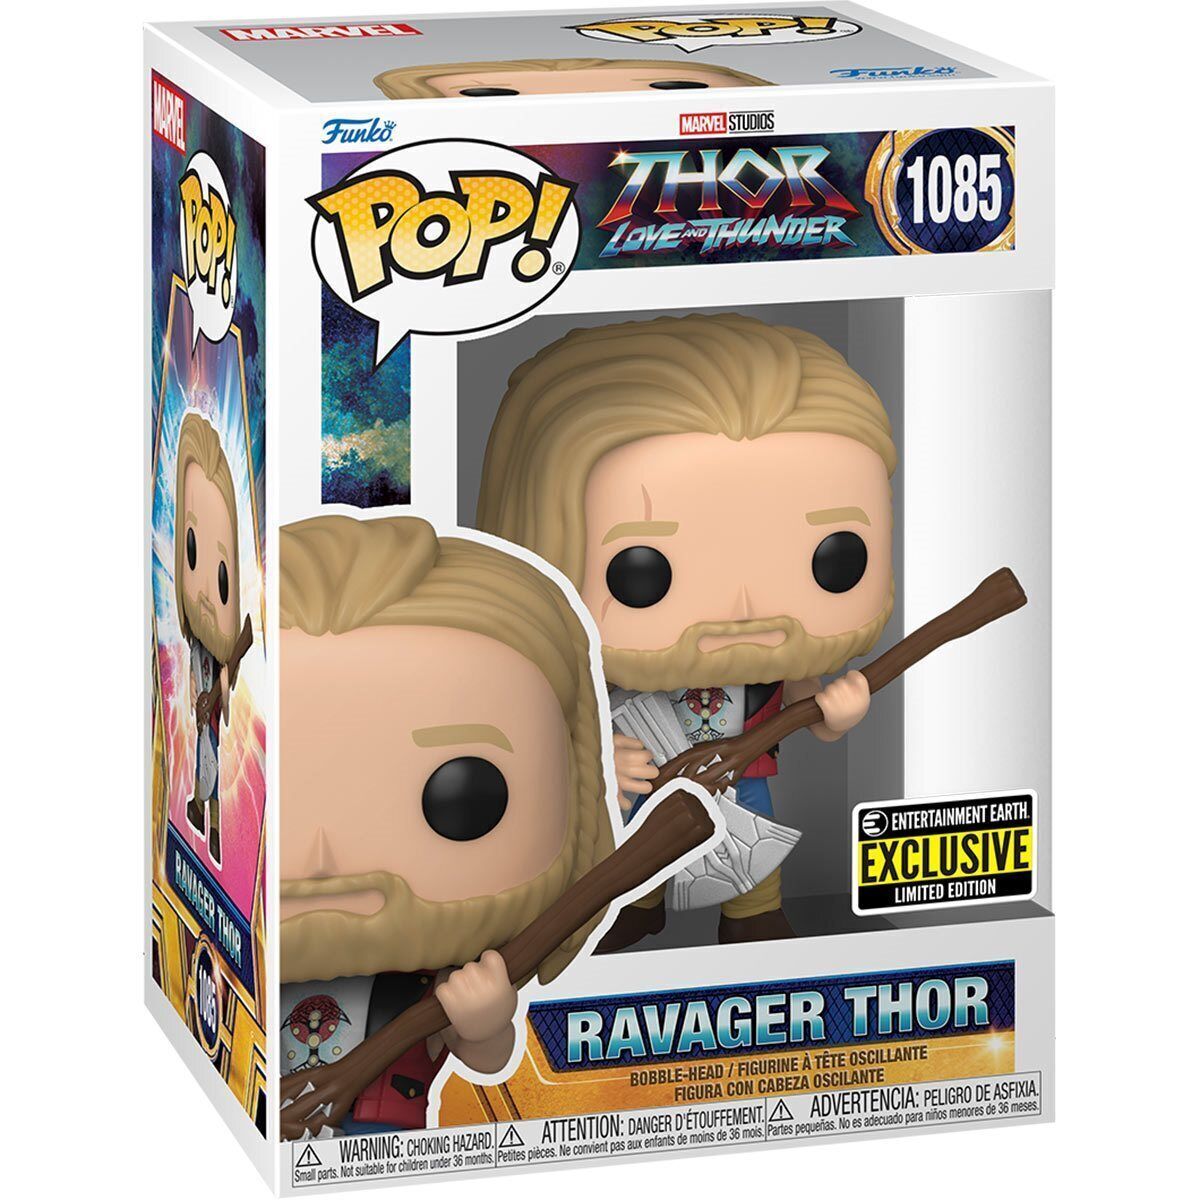 Thor: Love and Thunder Ravager Thor Pop Vinyl Figure - EE Exclusive